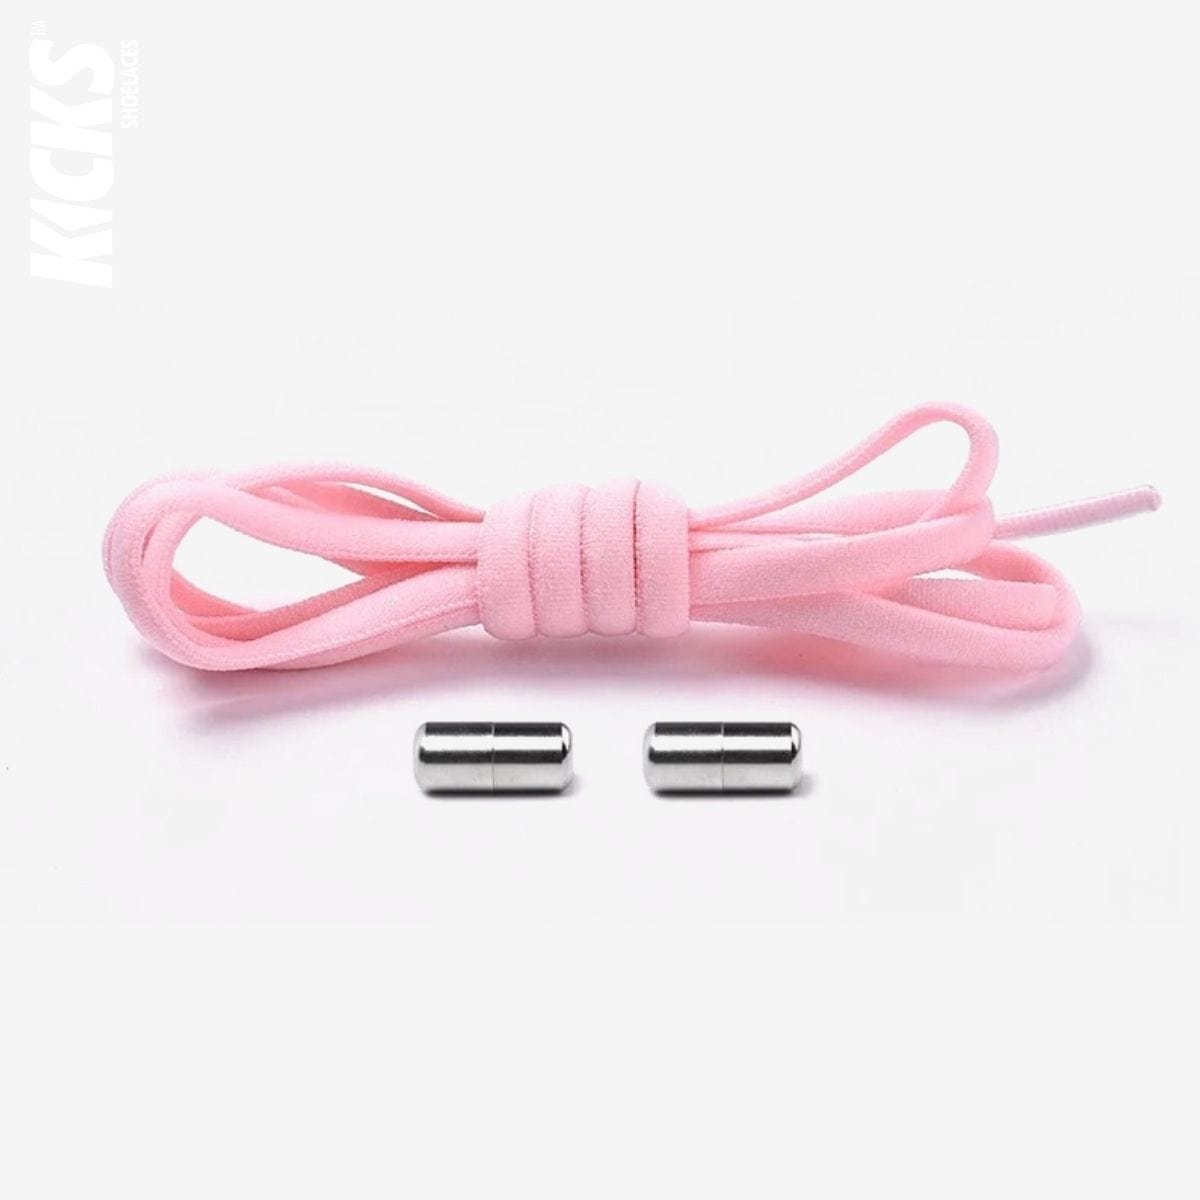 pink-kids-elastic-no-tie-shoe-laces-for-sneakers-by-kicks-shoelaces